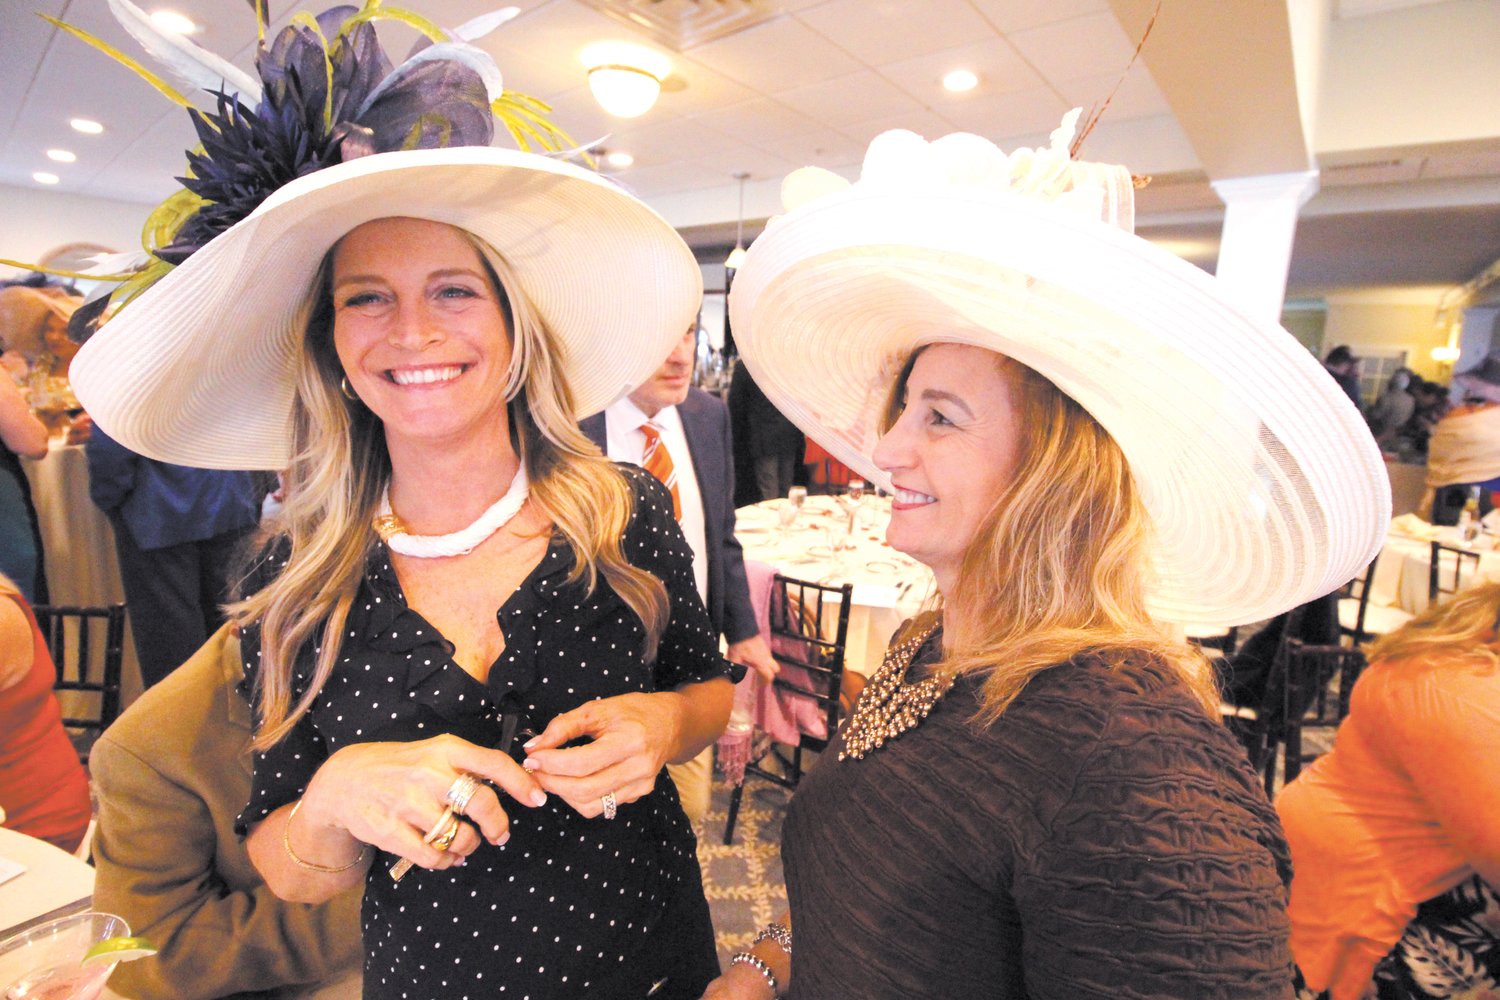 HAT TRICK: Tina Schadone and Maria Lanni stood out in their hats worn for a first time Saturday at the Warwick Country Club.